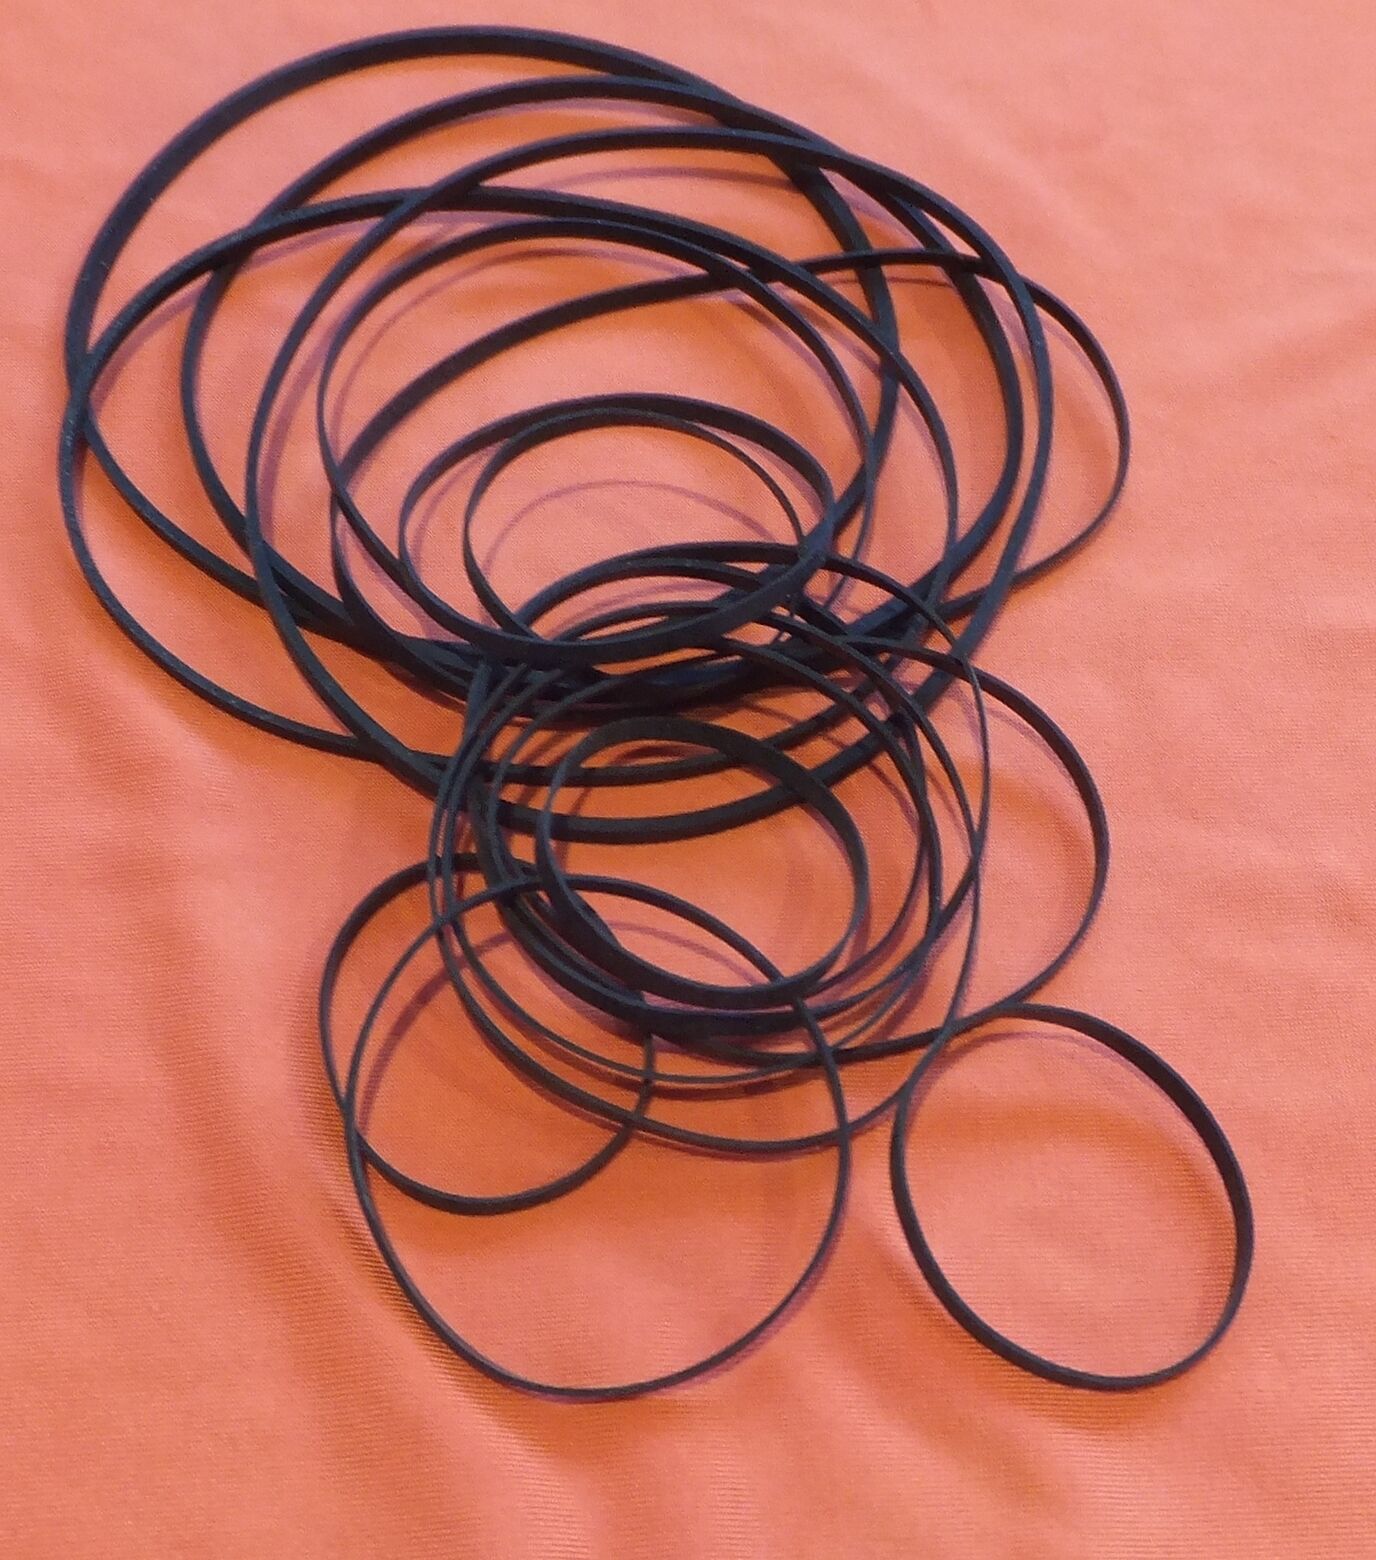 Set of 20 Flat Section Rubber Belts for Floppy Drives. 28-94mm. Diam. x 2mm.Wide